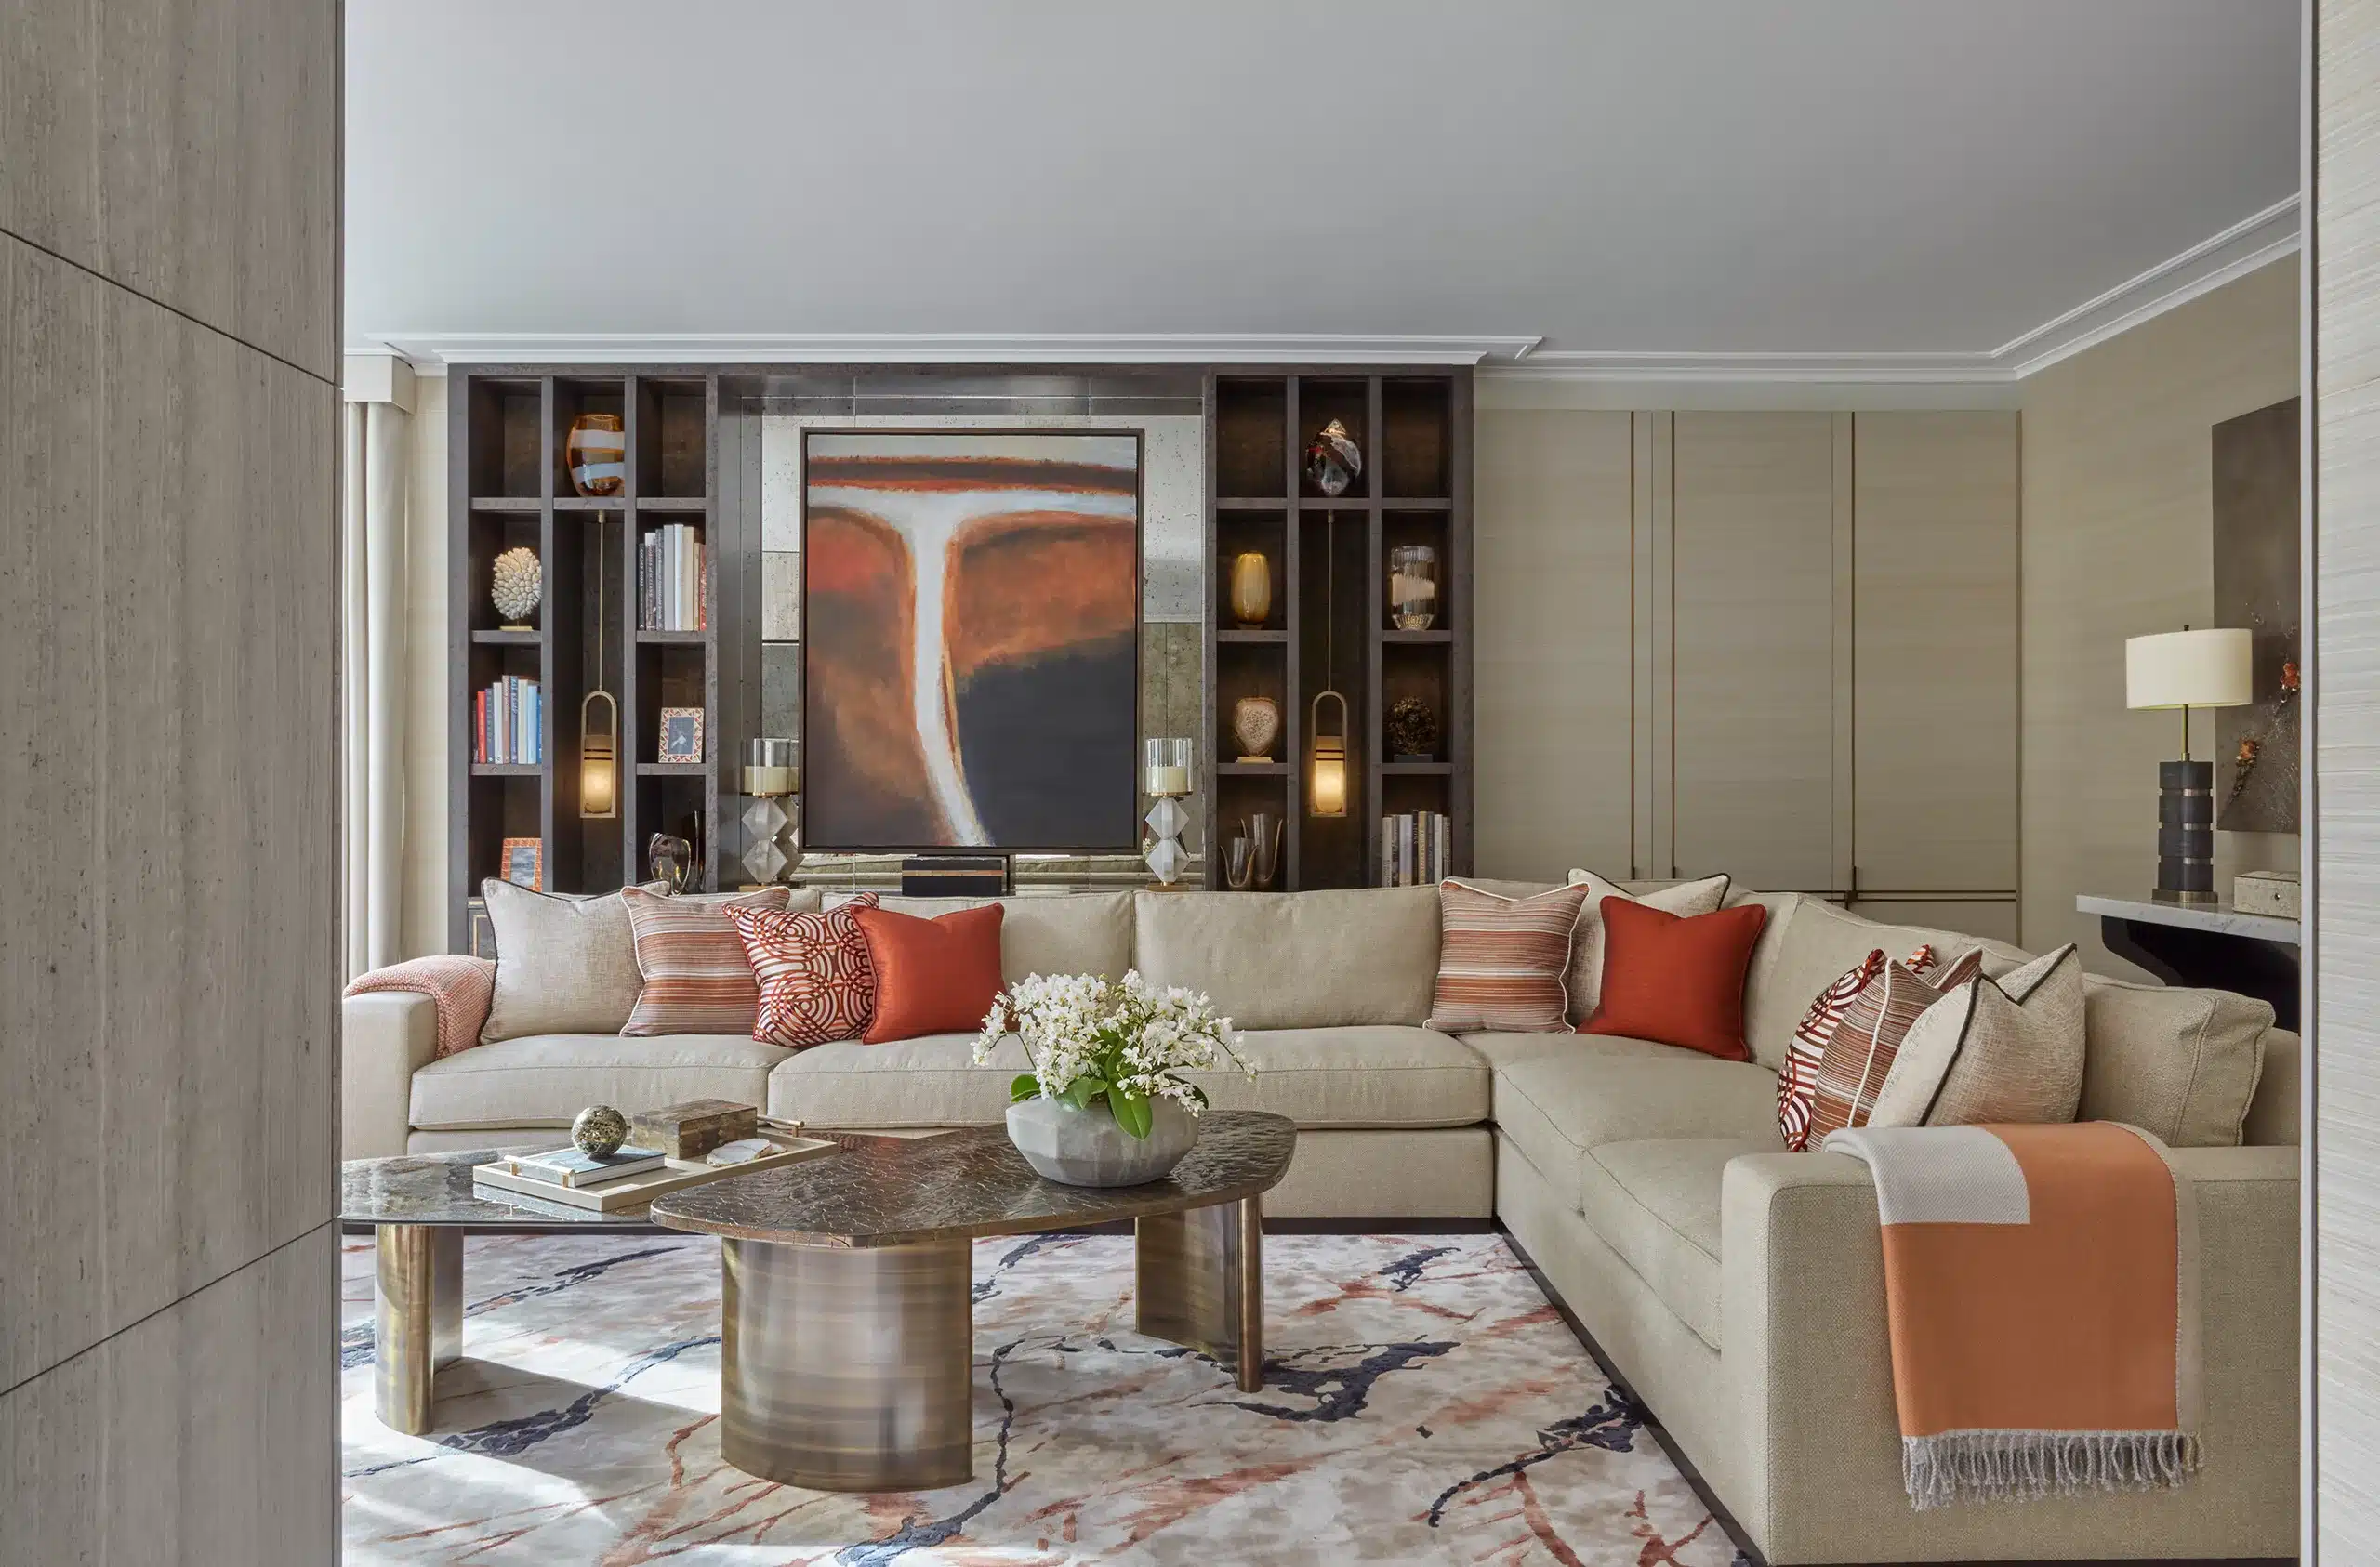 A living room in one of katharine pooleys luxury london projects